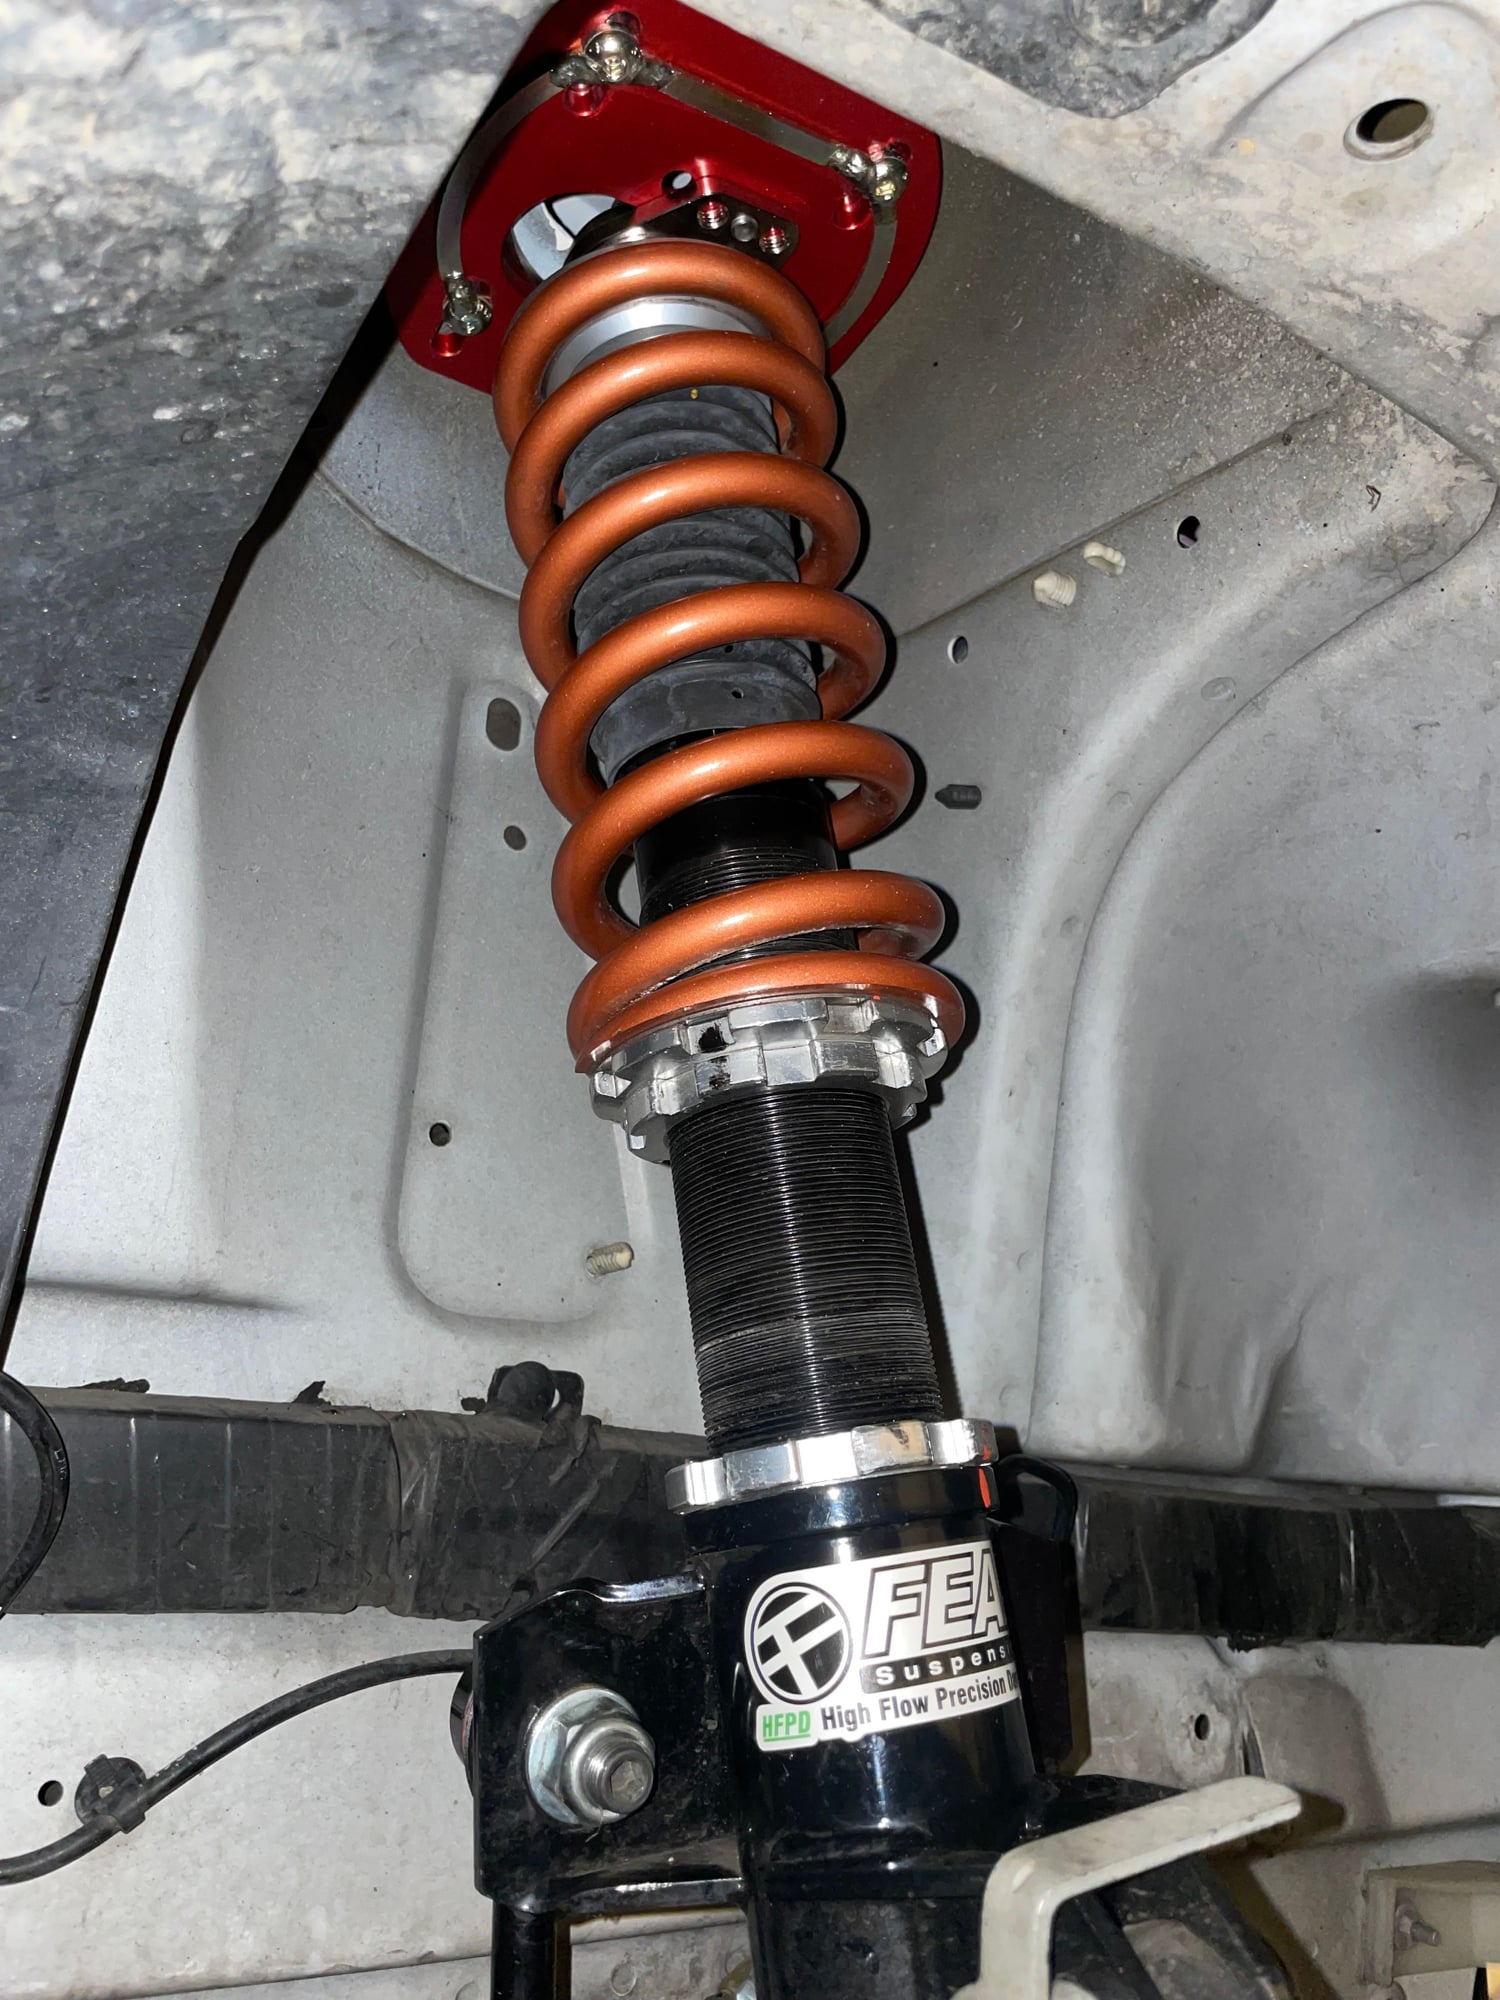 Steering/Suspension - Feal 441+ coilovers - Used - 2005 to 2014 Ford Mustang - Beaumont, CA 92223, United States